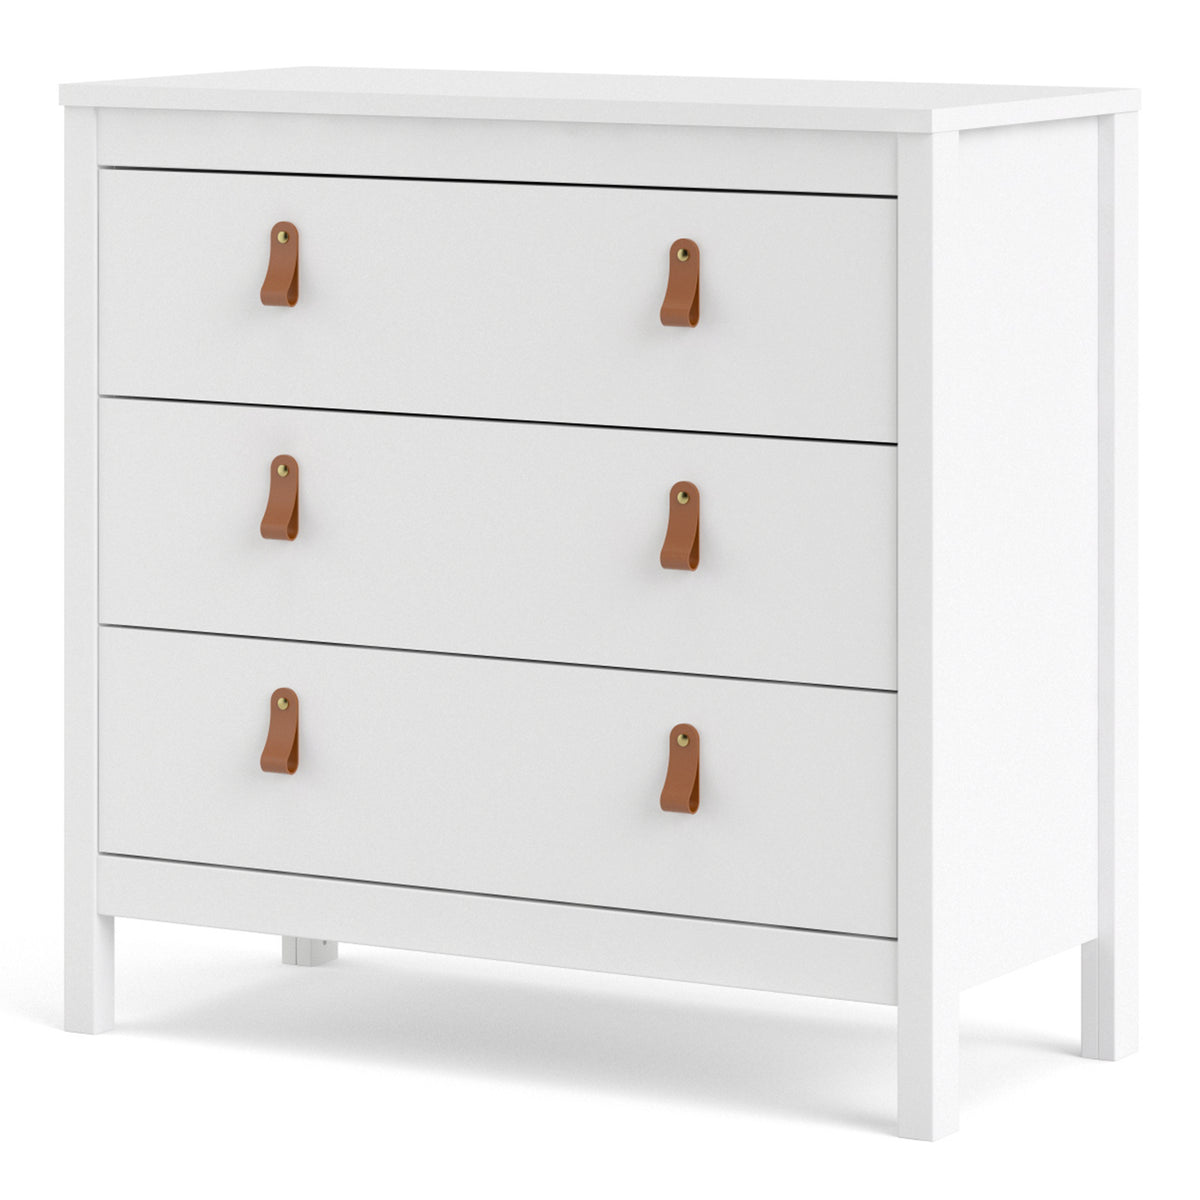 Barcelona Chest 3 Drawers in White